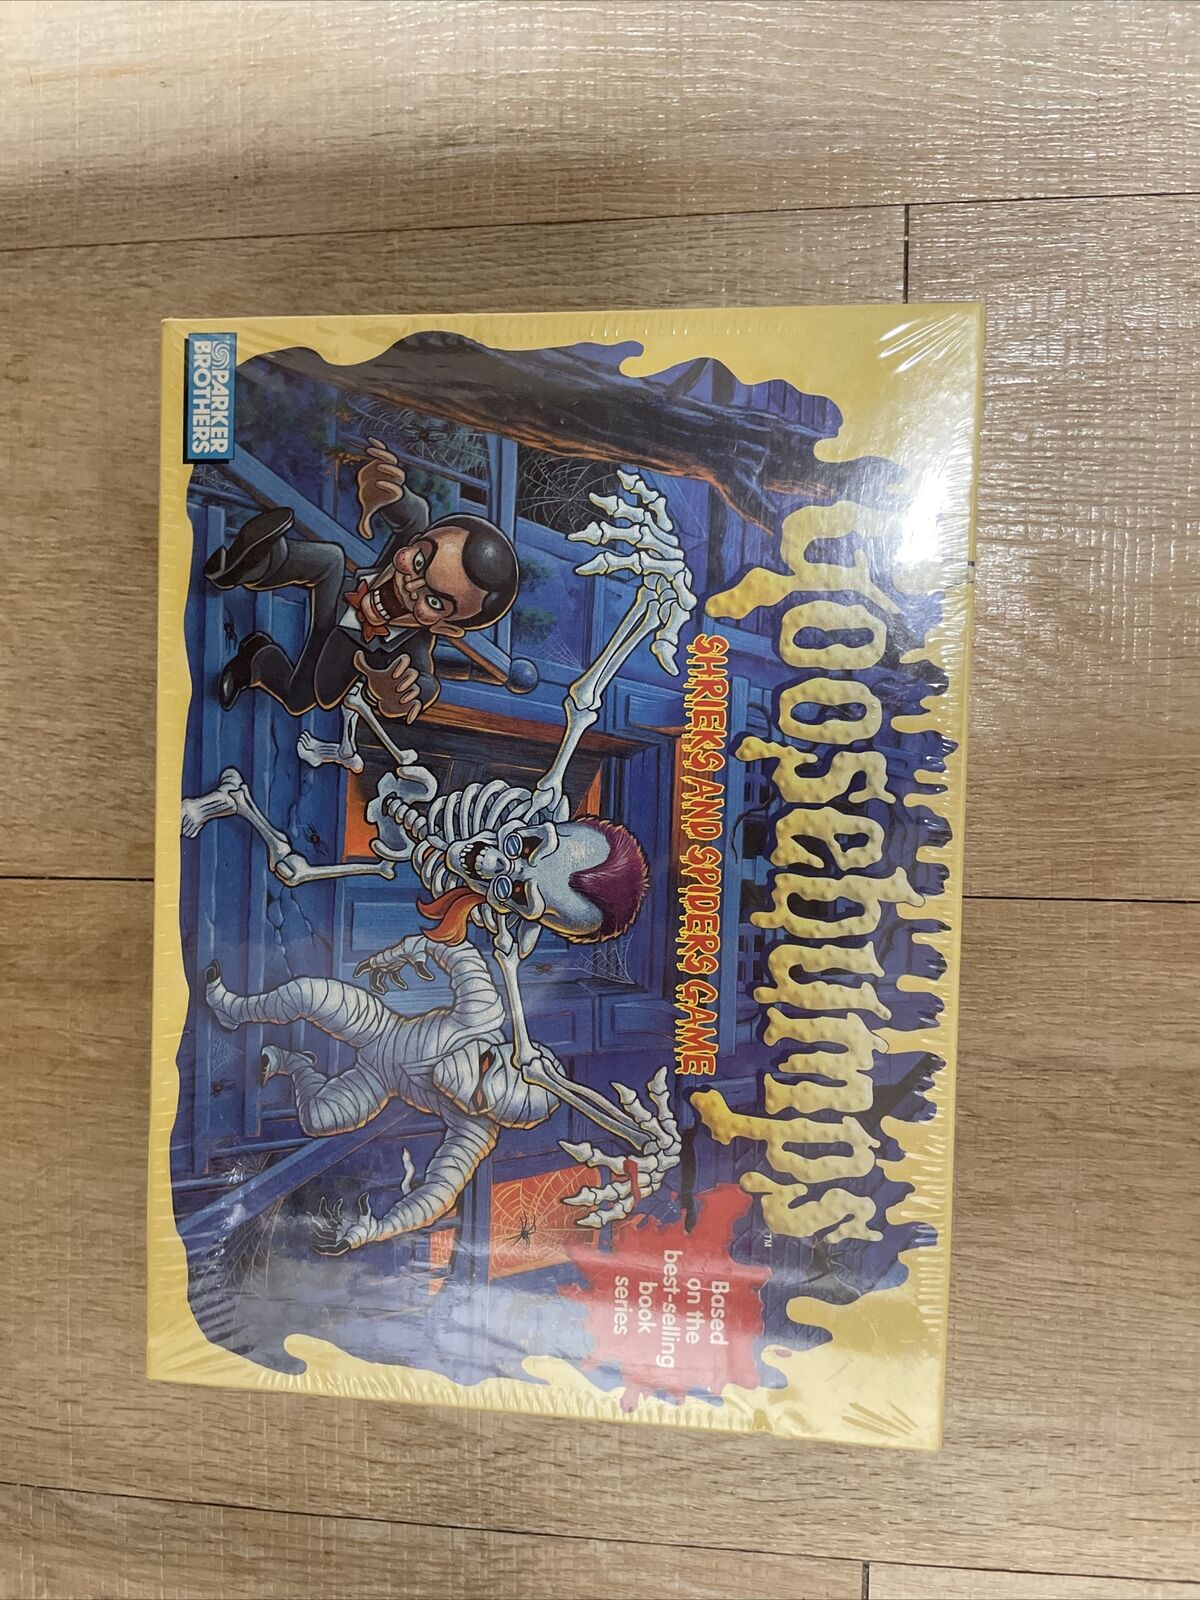 1995 Goosebumps: Shrieks and Spiders Game  mint condition unopened factory seal